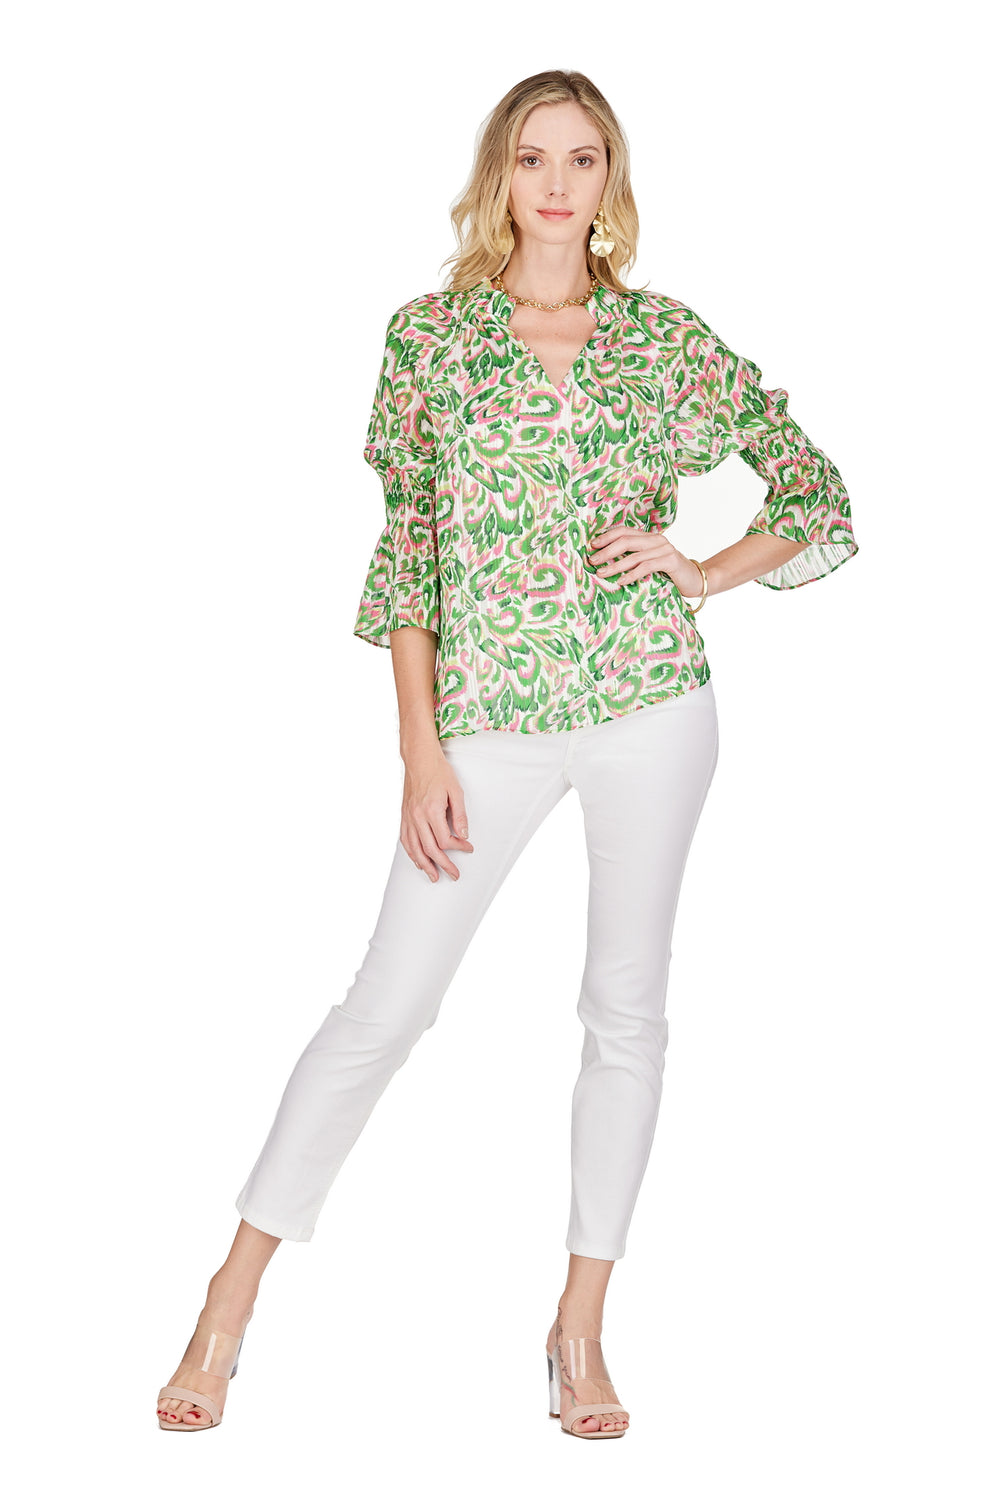 pink and green print jade brand blouse tres chic online boutique near me houston texas summer spring clothing